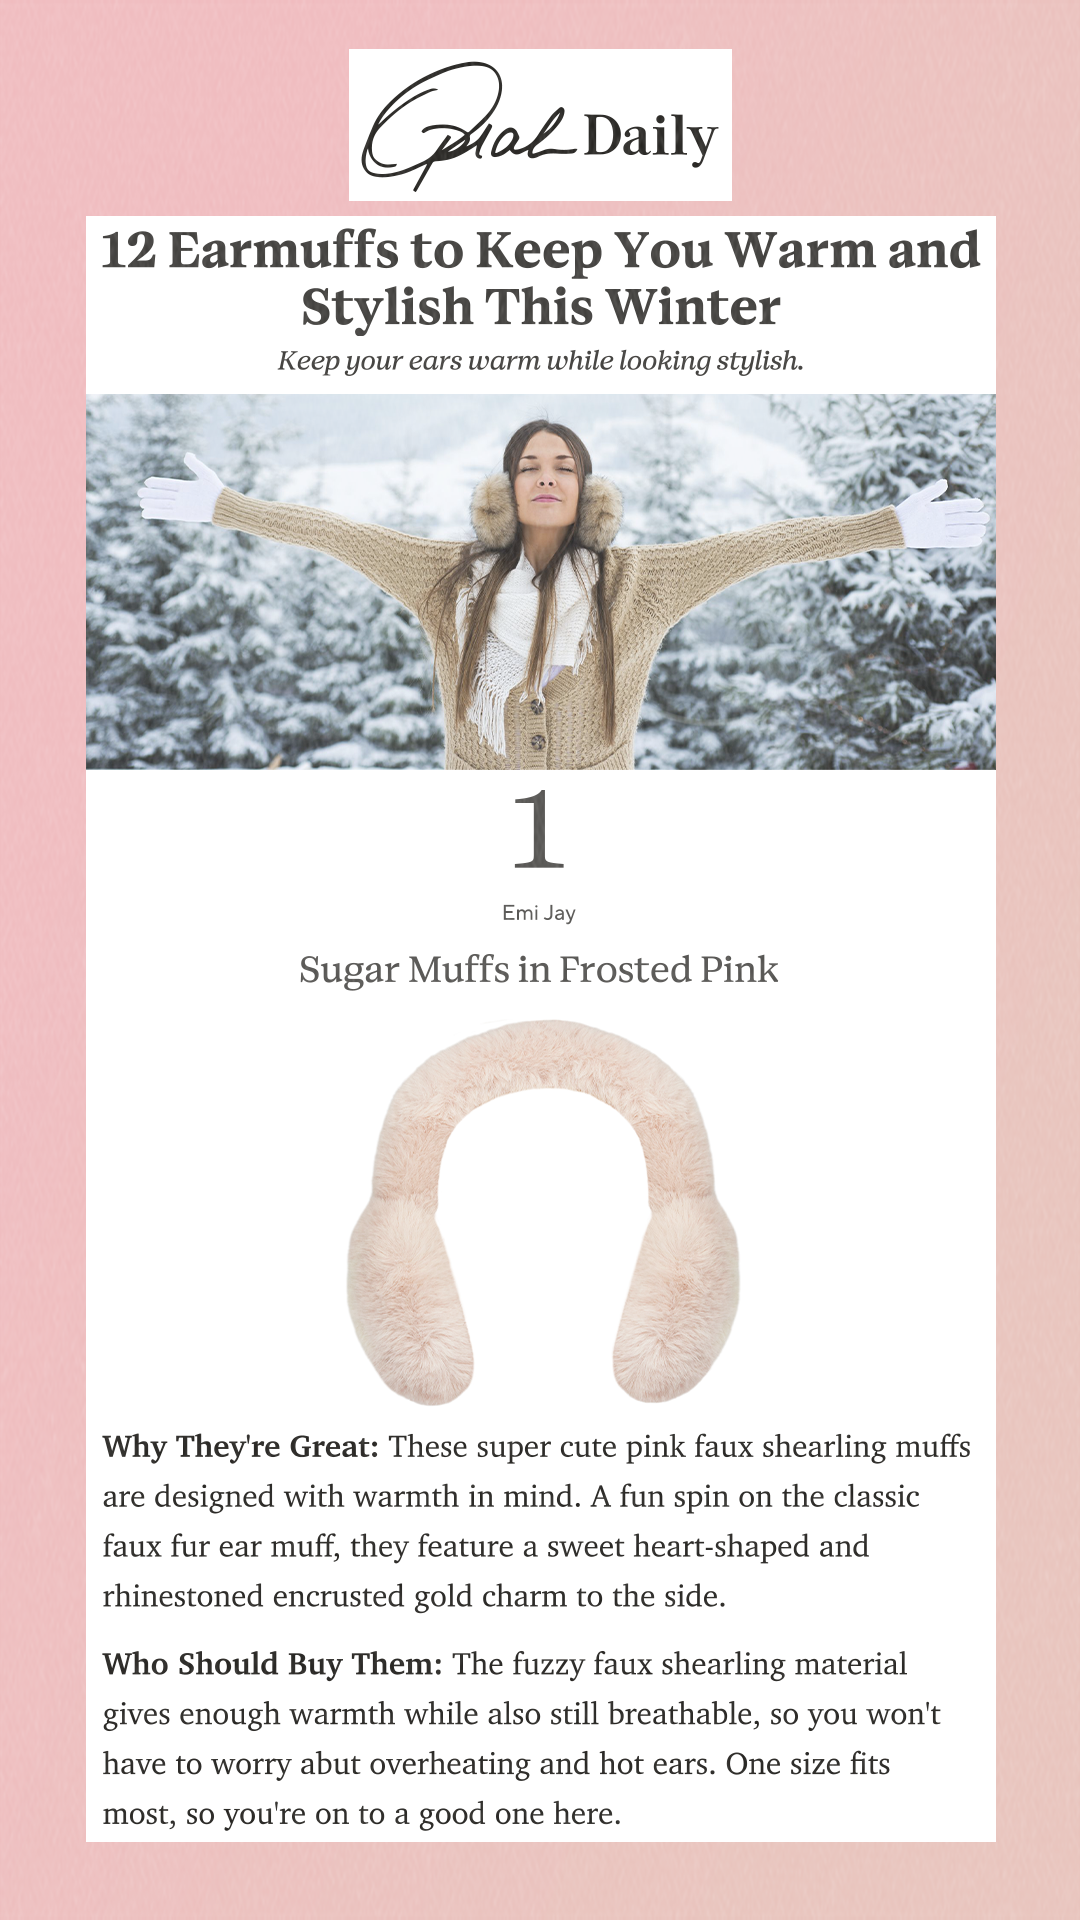 12 Earmuffs to Keep You Warm and Stylish This Winter Keep your ears warm while looking stylish. 1 Emi Jay Sugar Muffs in Frosted Pink  Why They're Great: These super cute pink faux shearling muffs are designed with warmth in mind. A fun spin on the classic faux fur ear muff, they feature a sweet heart-shaped and rhinestoned encrusted gold charm to the side. Who Should Buy Them: The fuzzy faux shearling material gives enough warmth while also still breathable, so you won't have to worry abut overheating and hot ears. One size fits most, so you're on to a good one here.